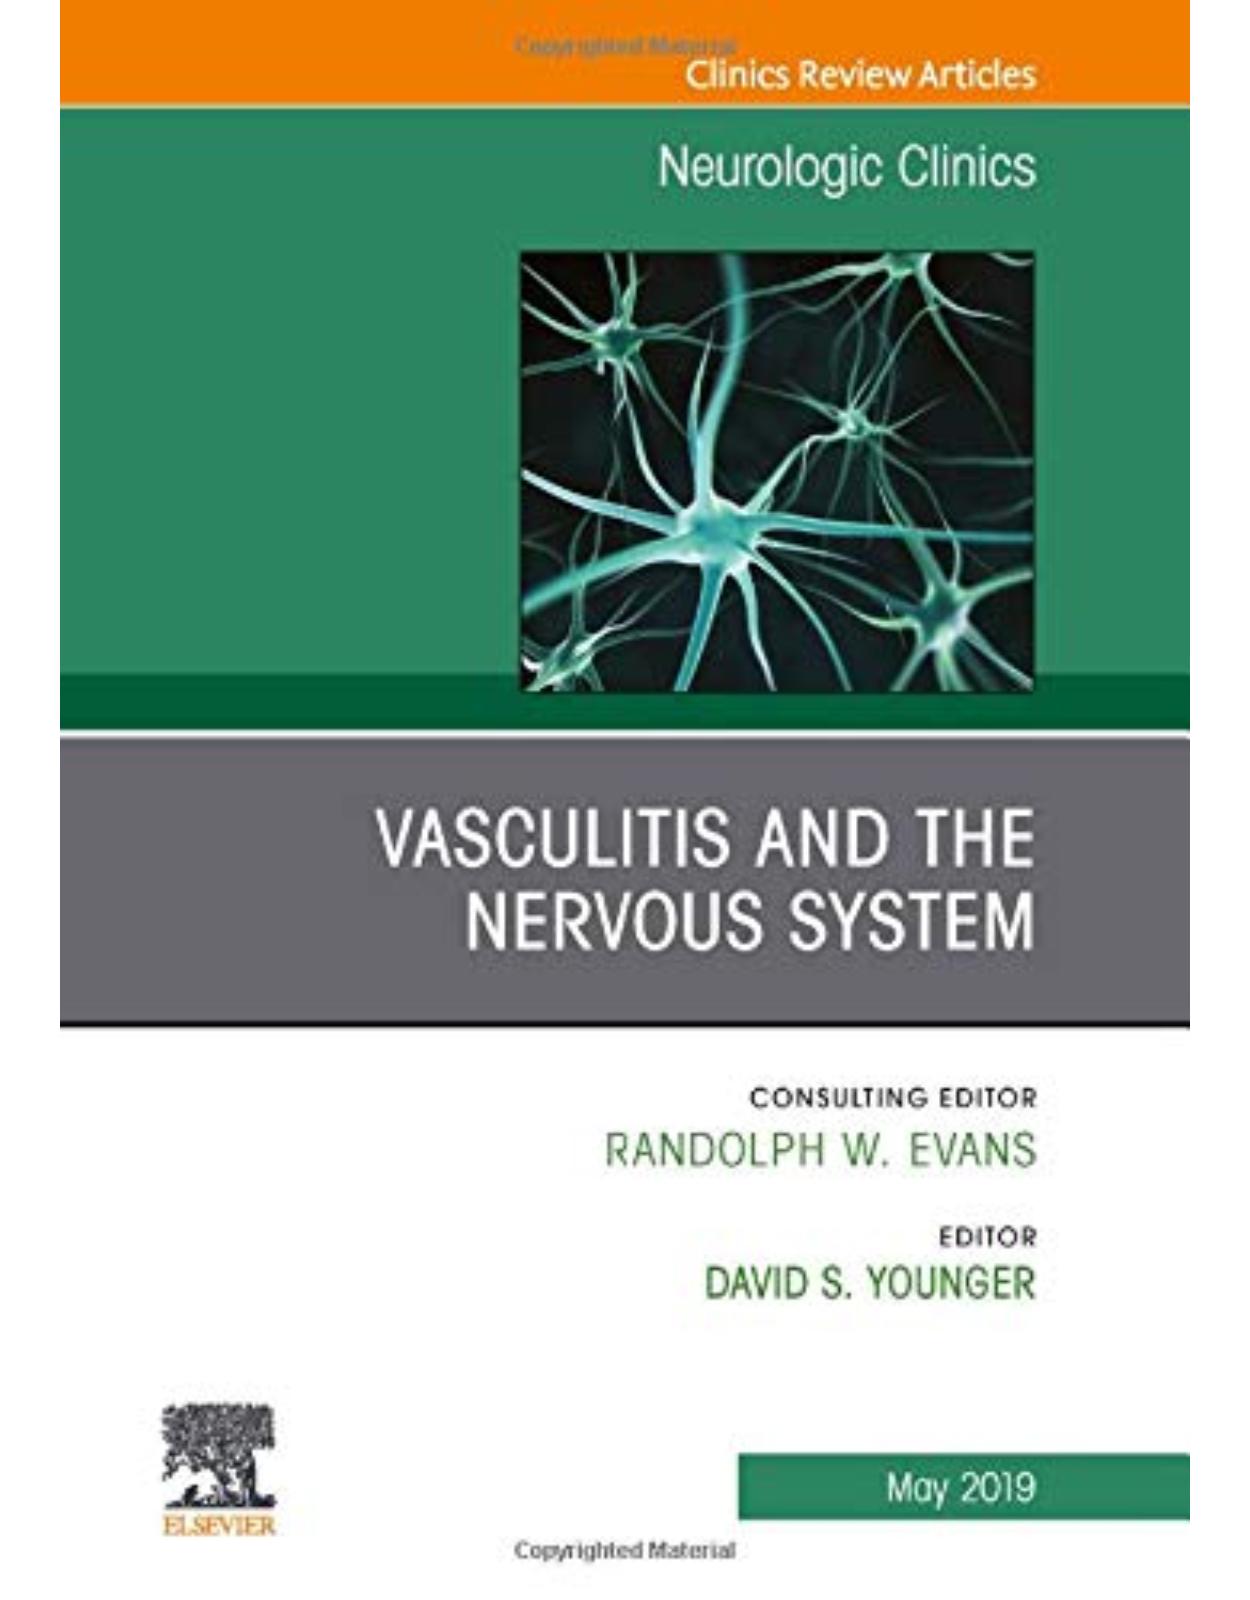 Vasculitis and the Nervous System, An Issue of Neurologic Clinics, Volume 37-2